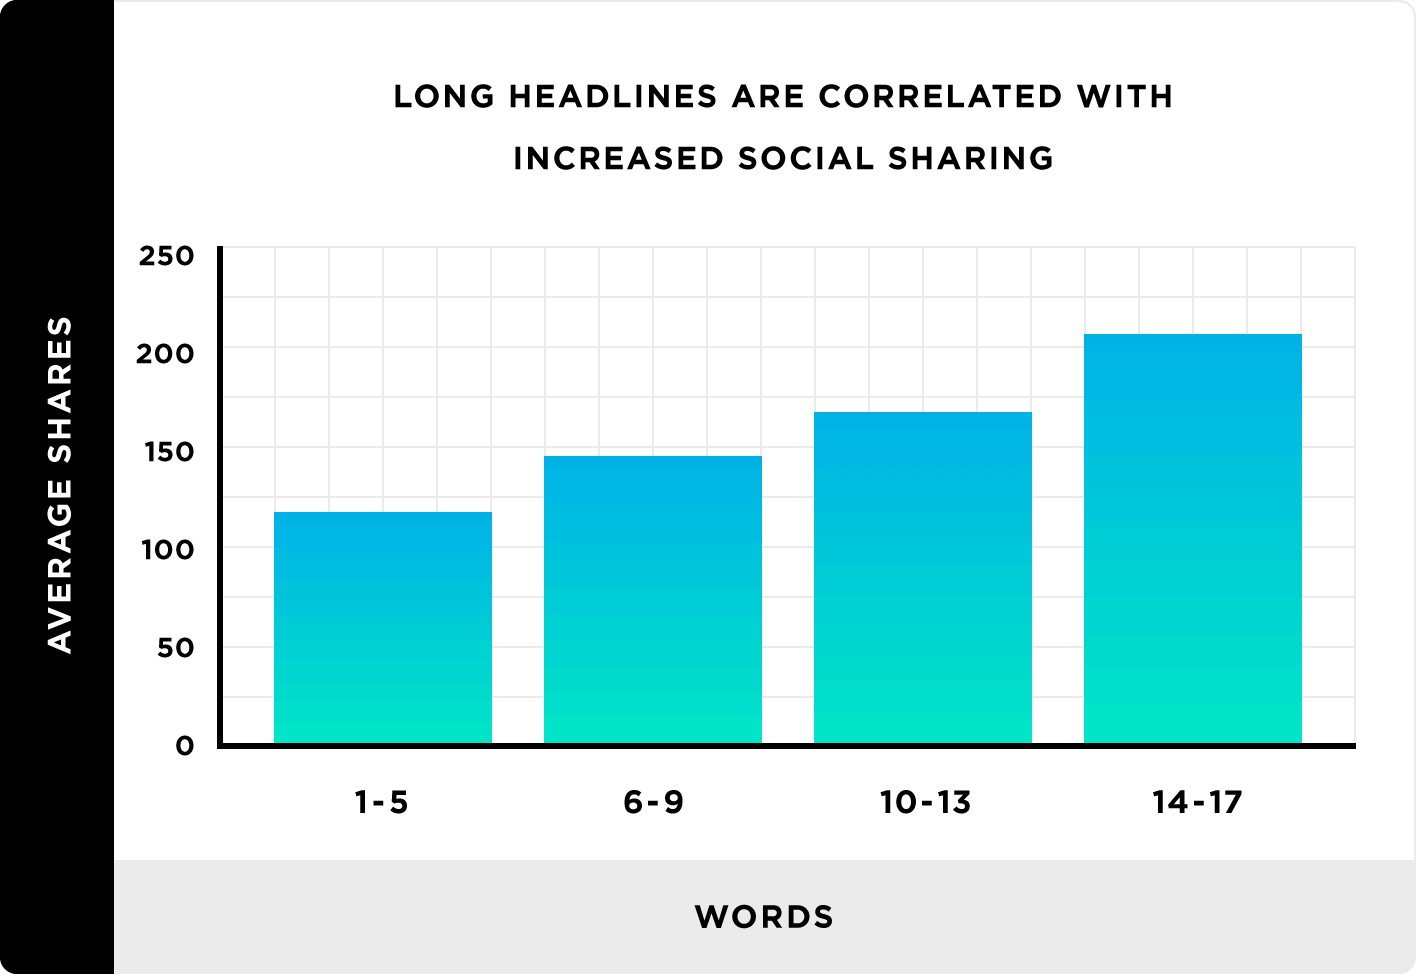 Bar chart showing long headlines correlate with increased social sharing 